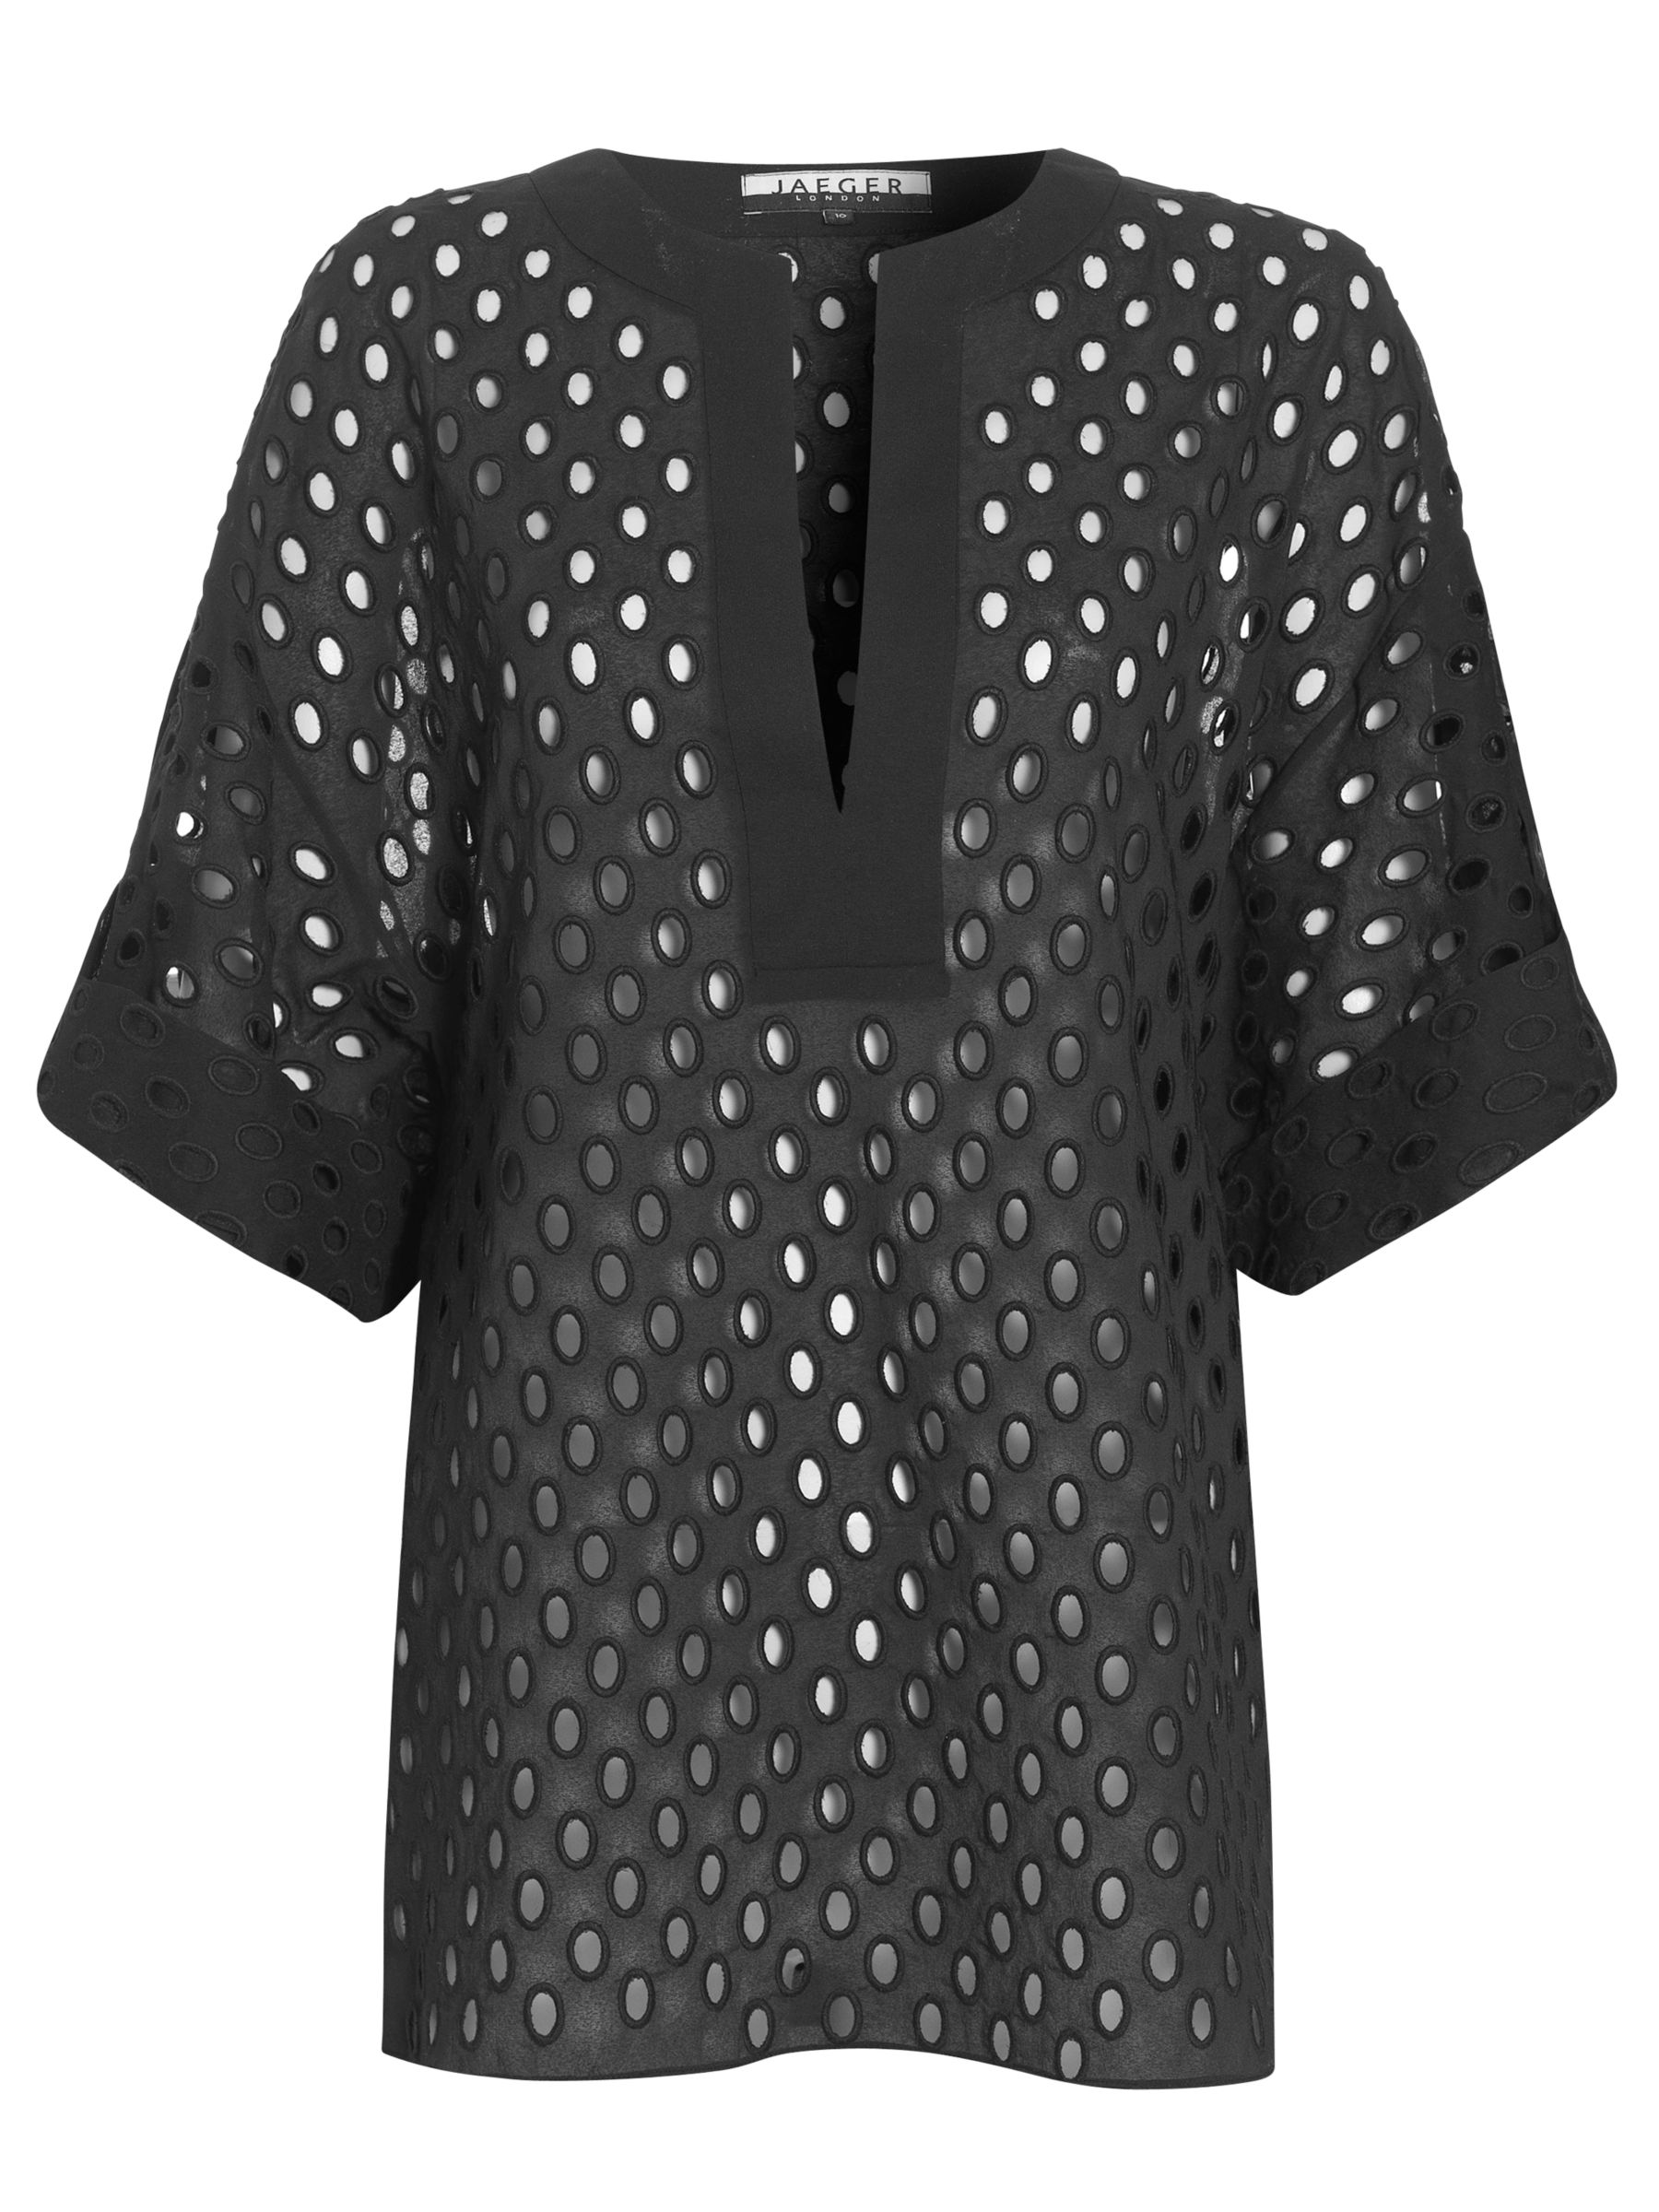 Broderie Anglaise Blouse, Black